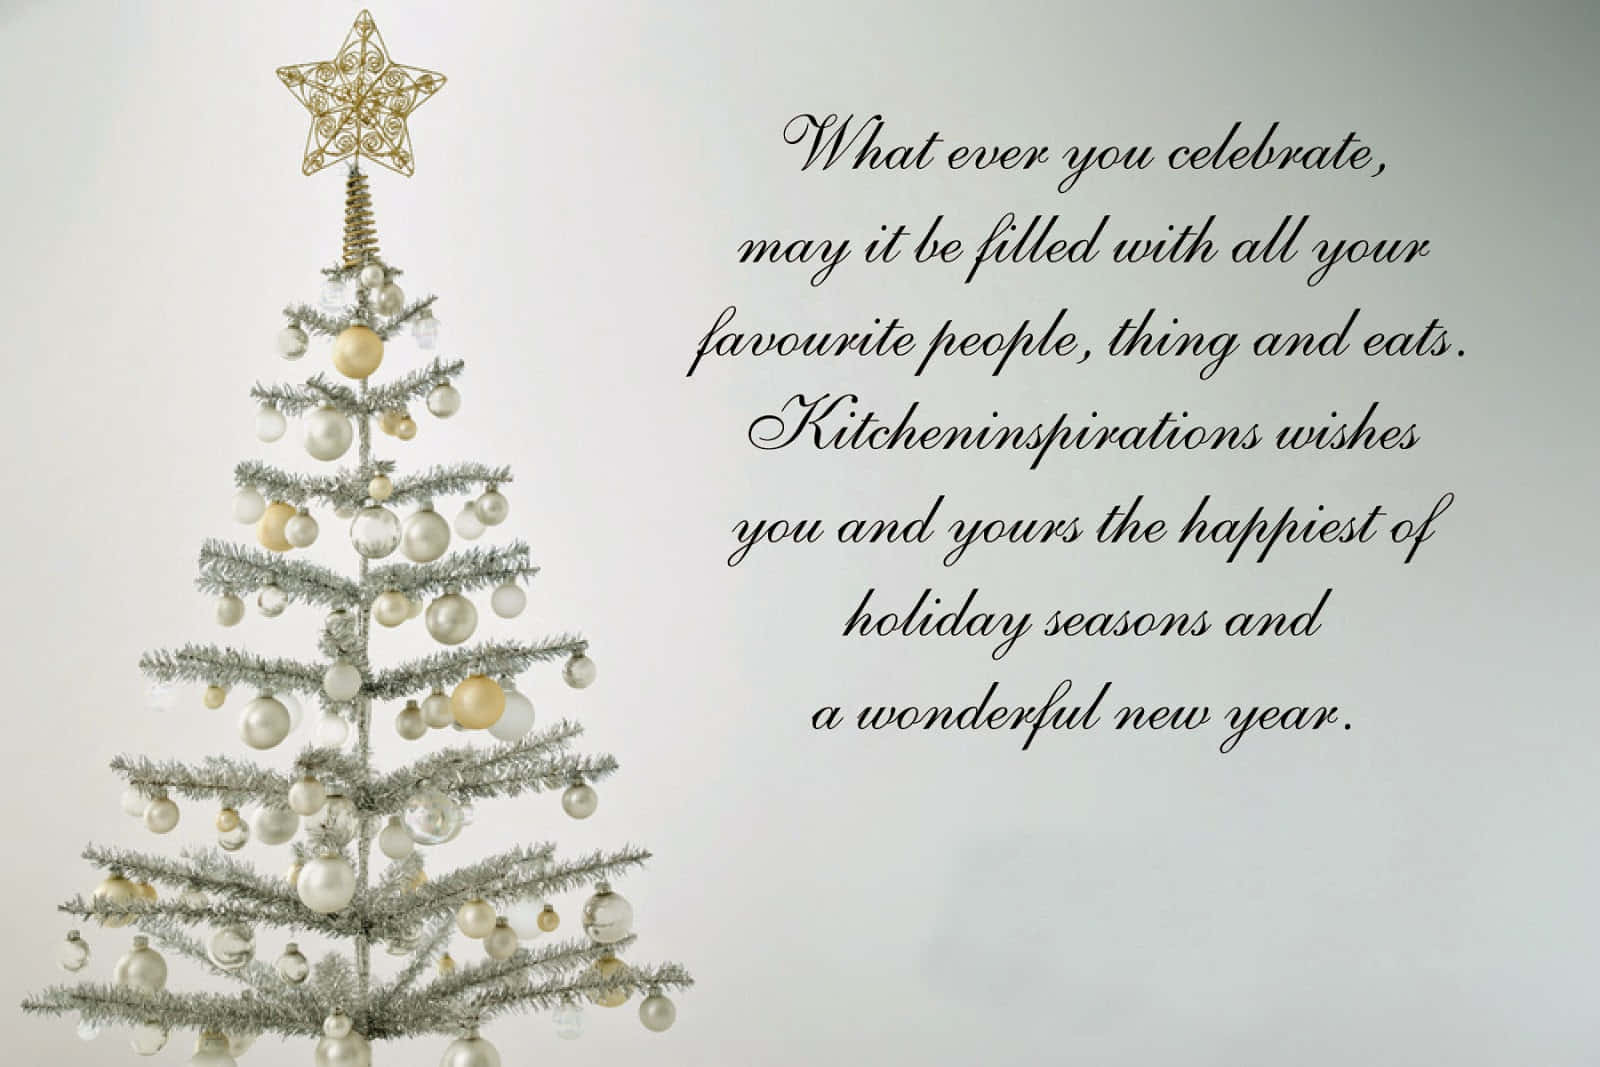 "The best of all gifts around any Christmas tree: the presence of a happy family all wrapped up in each other." Wallpaper